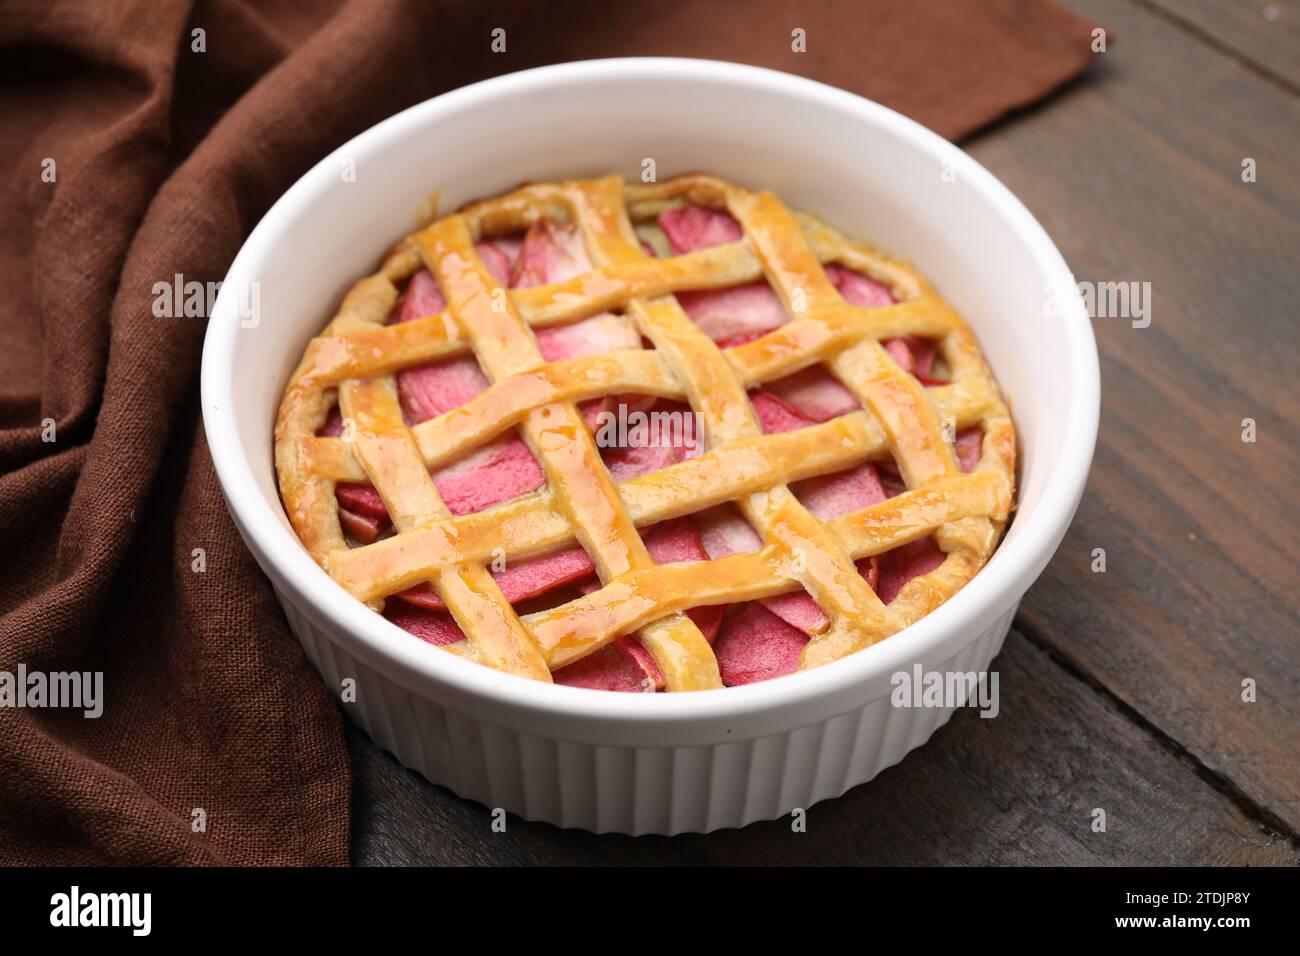 Baking dish with tasty apple pie on wooden table, closeup Stock Photo